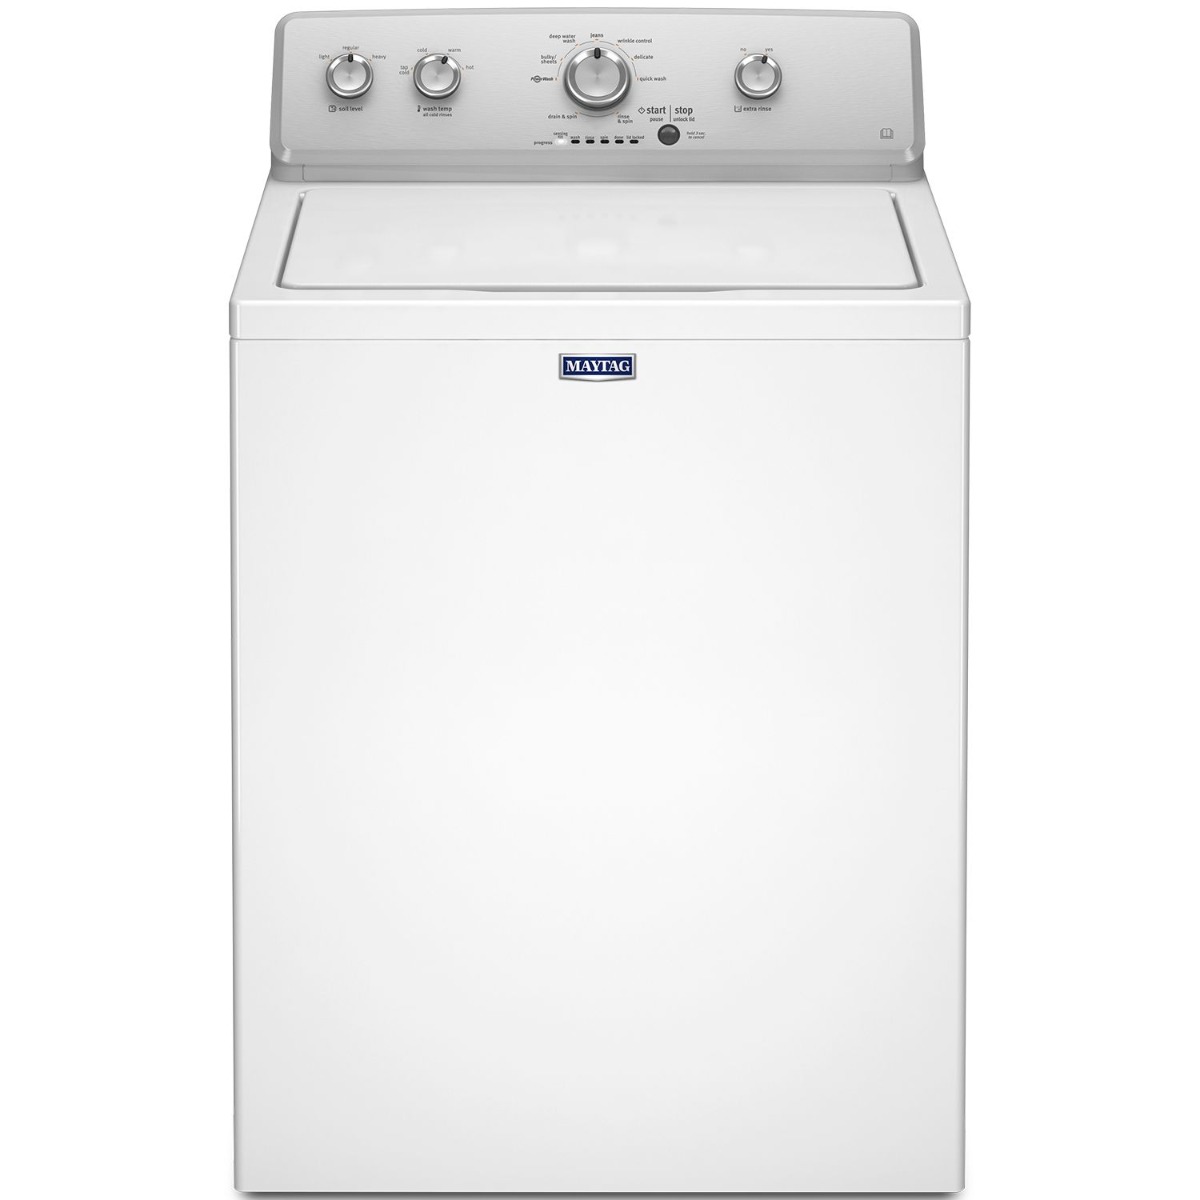 Maytag Automatic Top Load Washing Machine12 Kg Capacity, 10 Programs, 770 RPM, Stainless Steel Drum, White, USA - 4KMVWC430JW